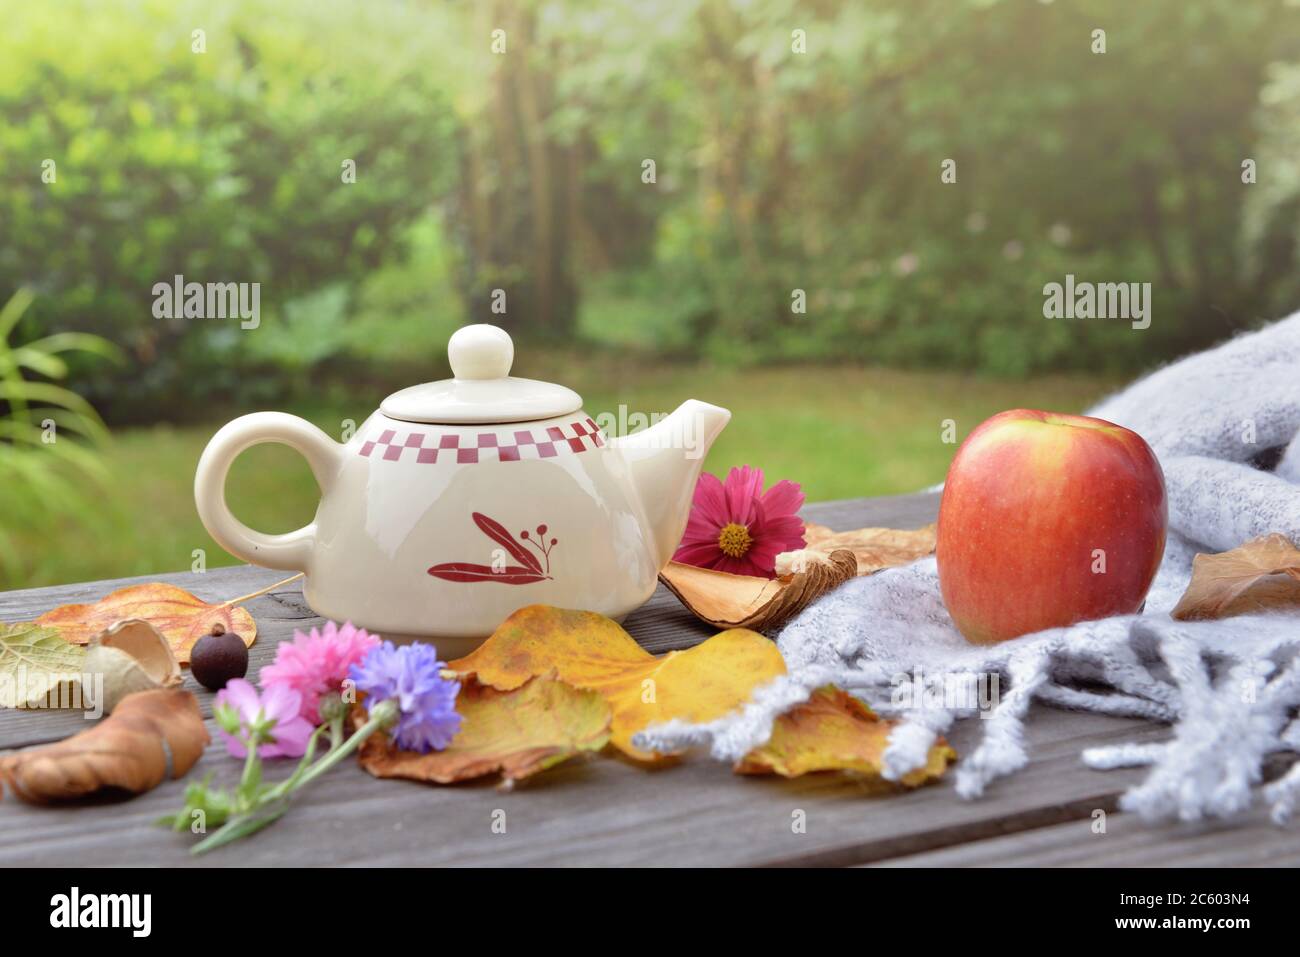 teapot on a wooden table in garden among autumnal  leaf and red apple on wool scarf Stock Photo